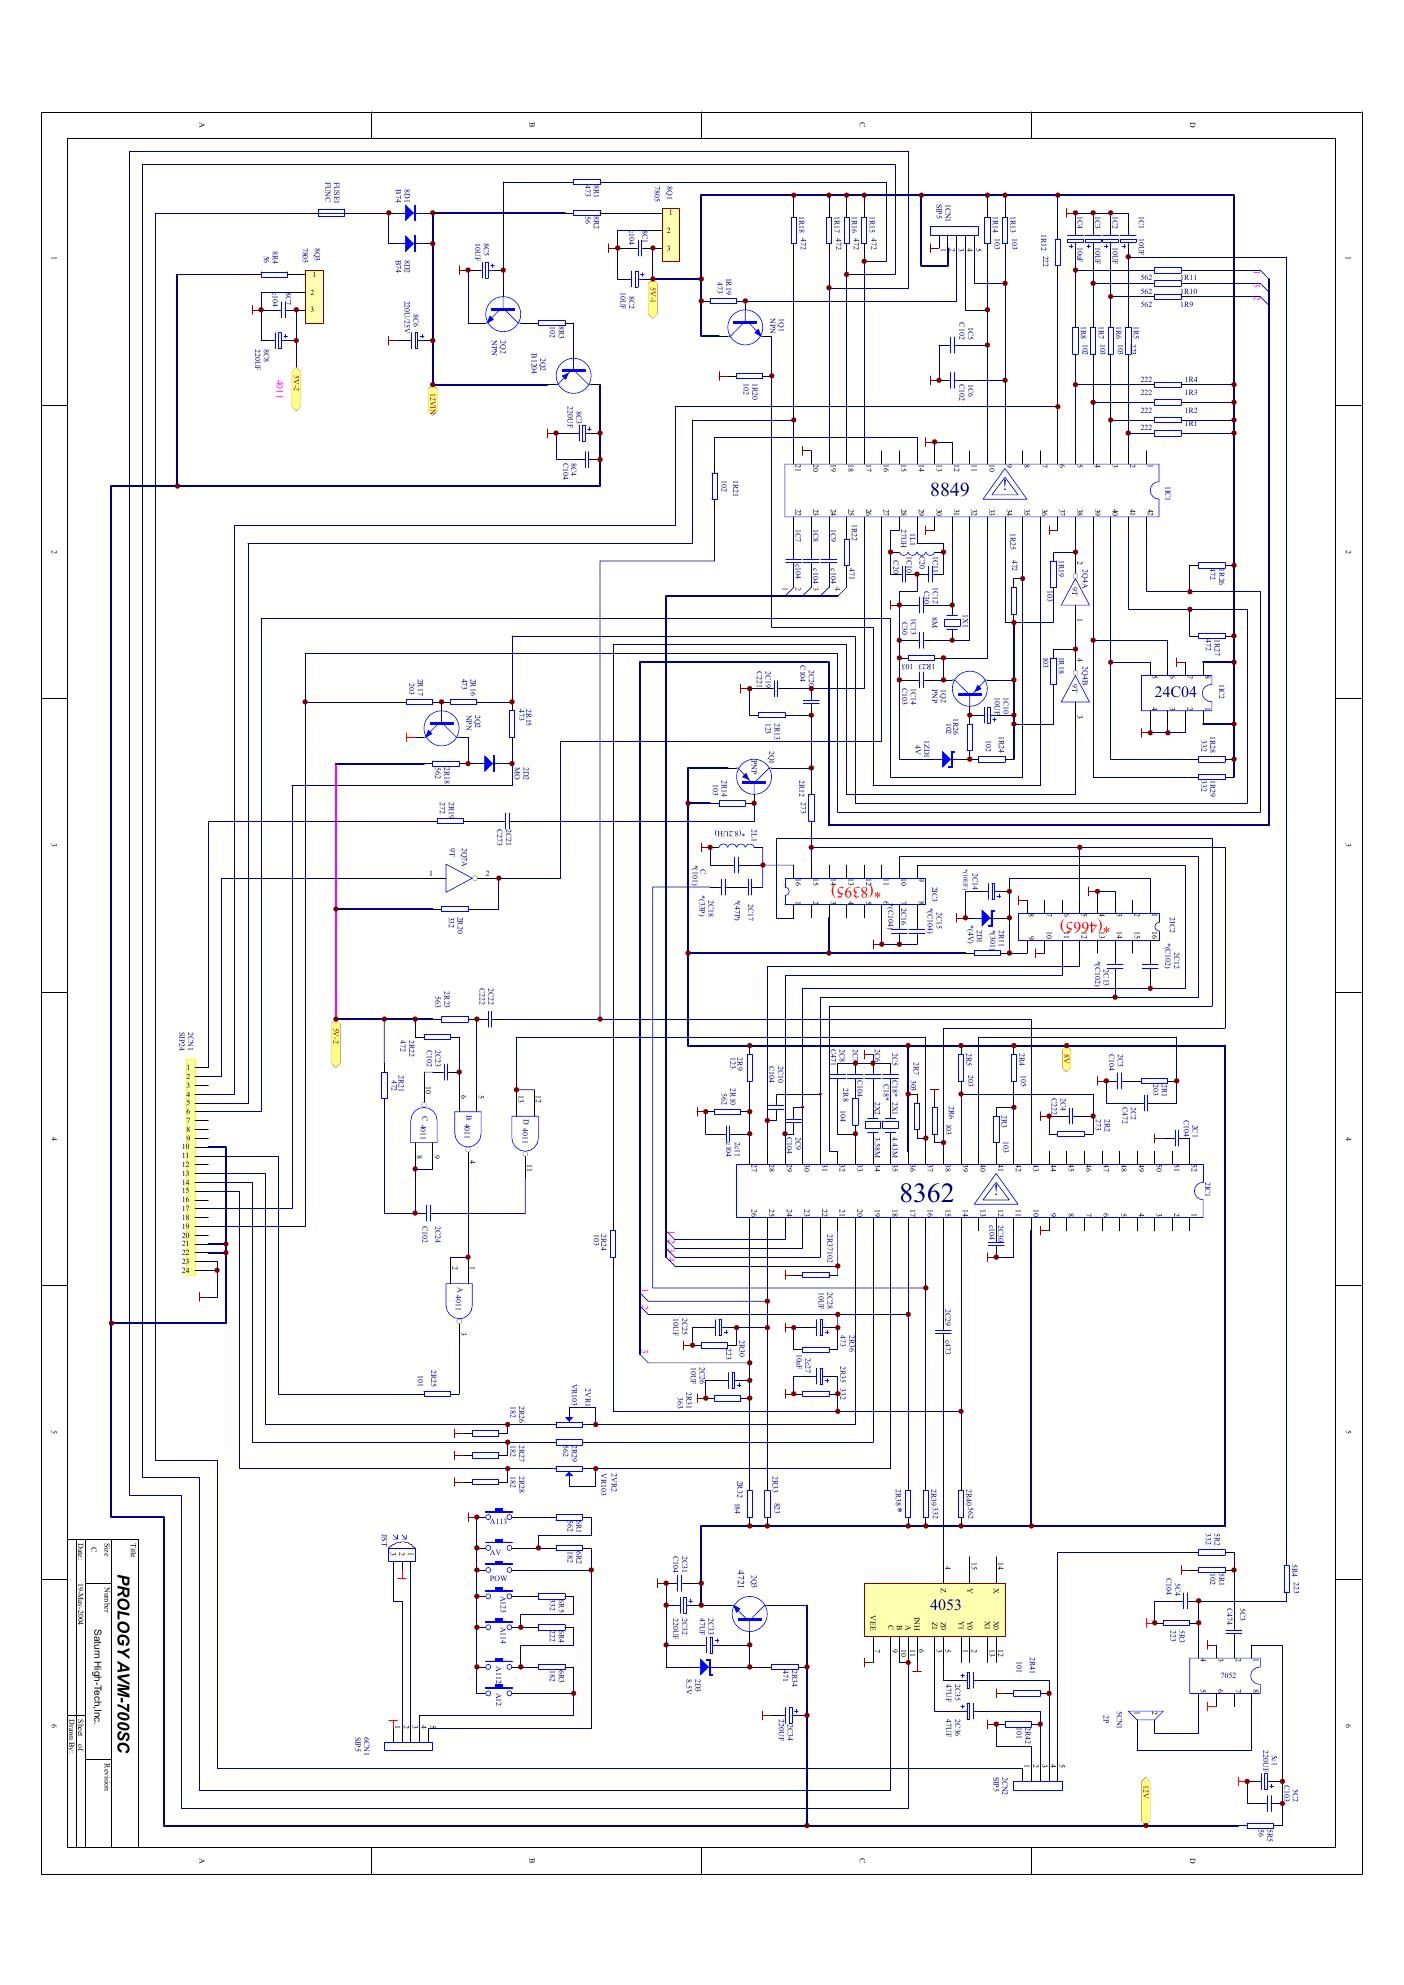 Free Audio Service Manuals - Free download prology avm 700 sc schematic